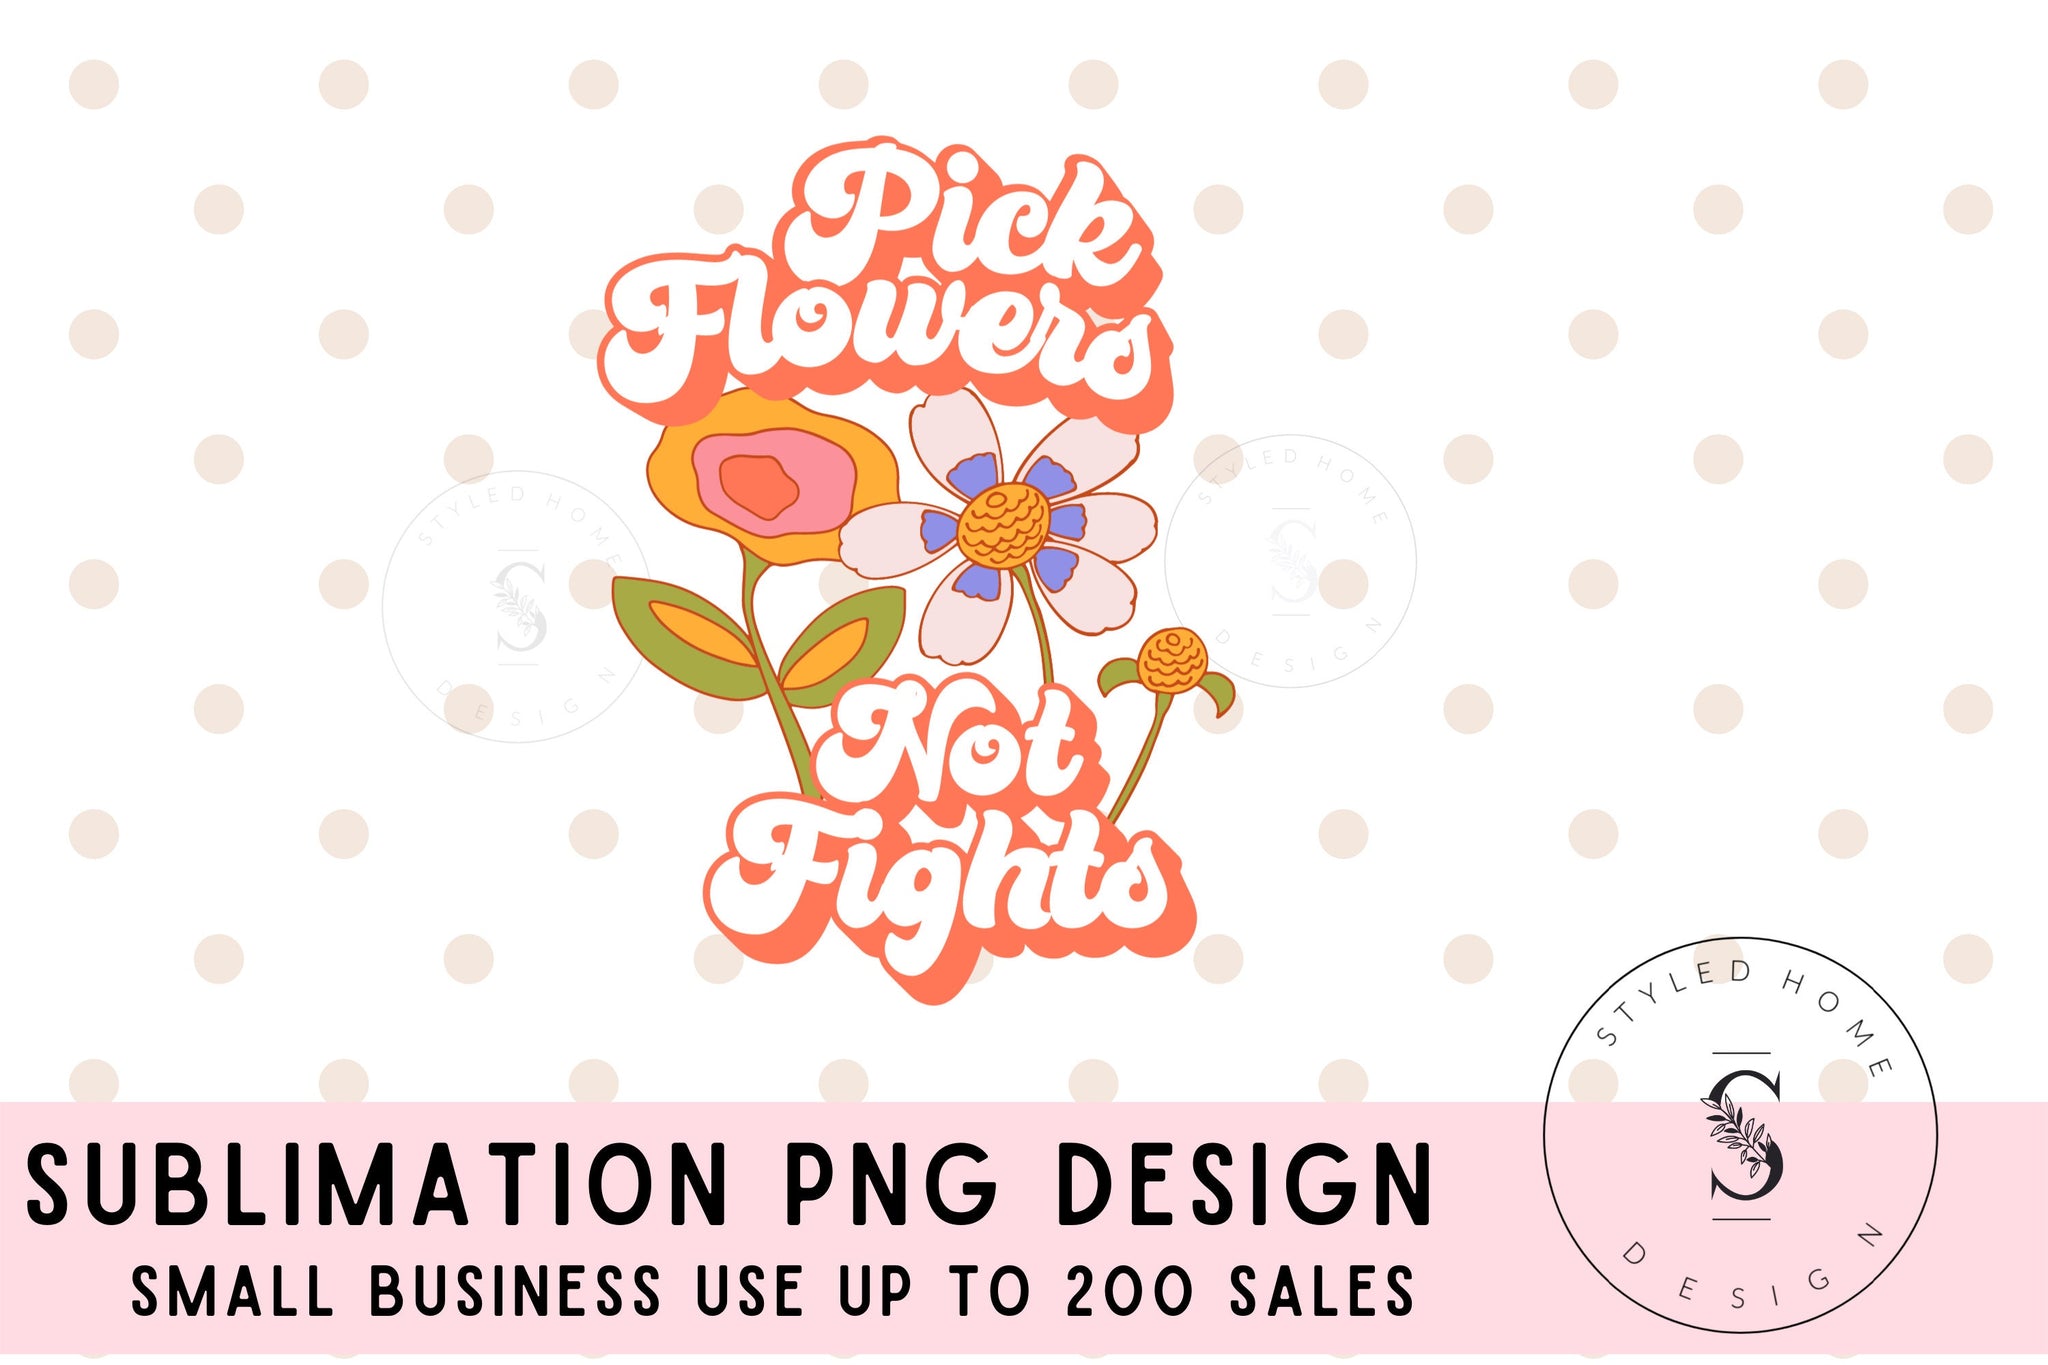 Pick Flowers Not Fights Good Vibes, Mama's Sunshine, Sunny Days, Boho, Spring, Summer Printable PNG, Silhouette, Cricut, Sublimation